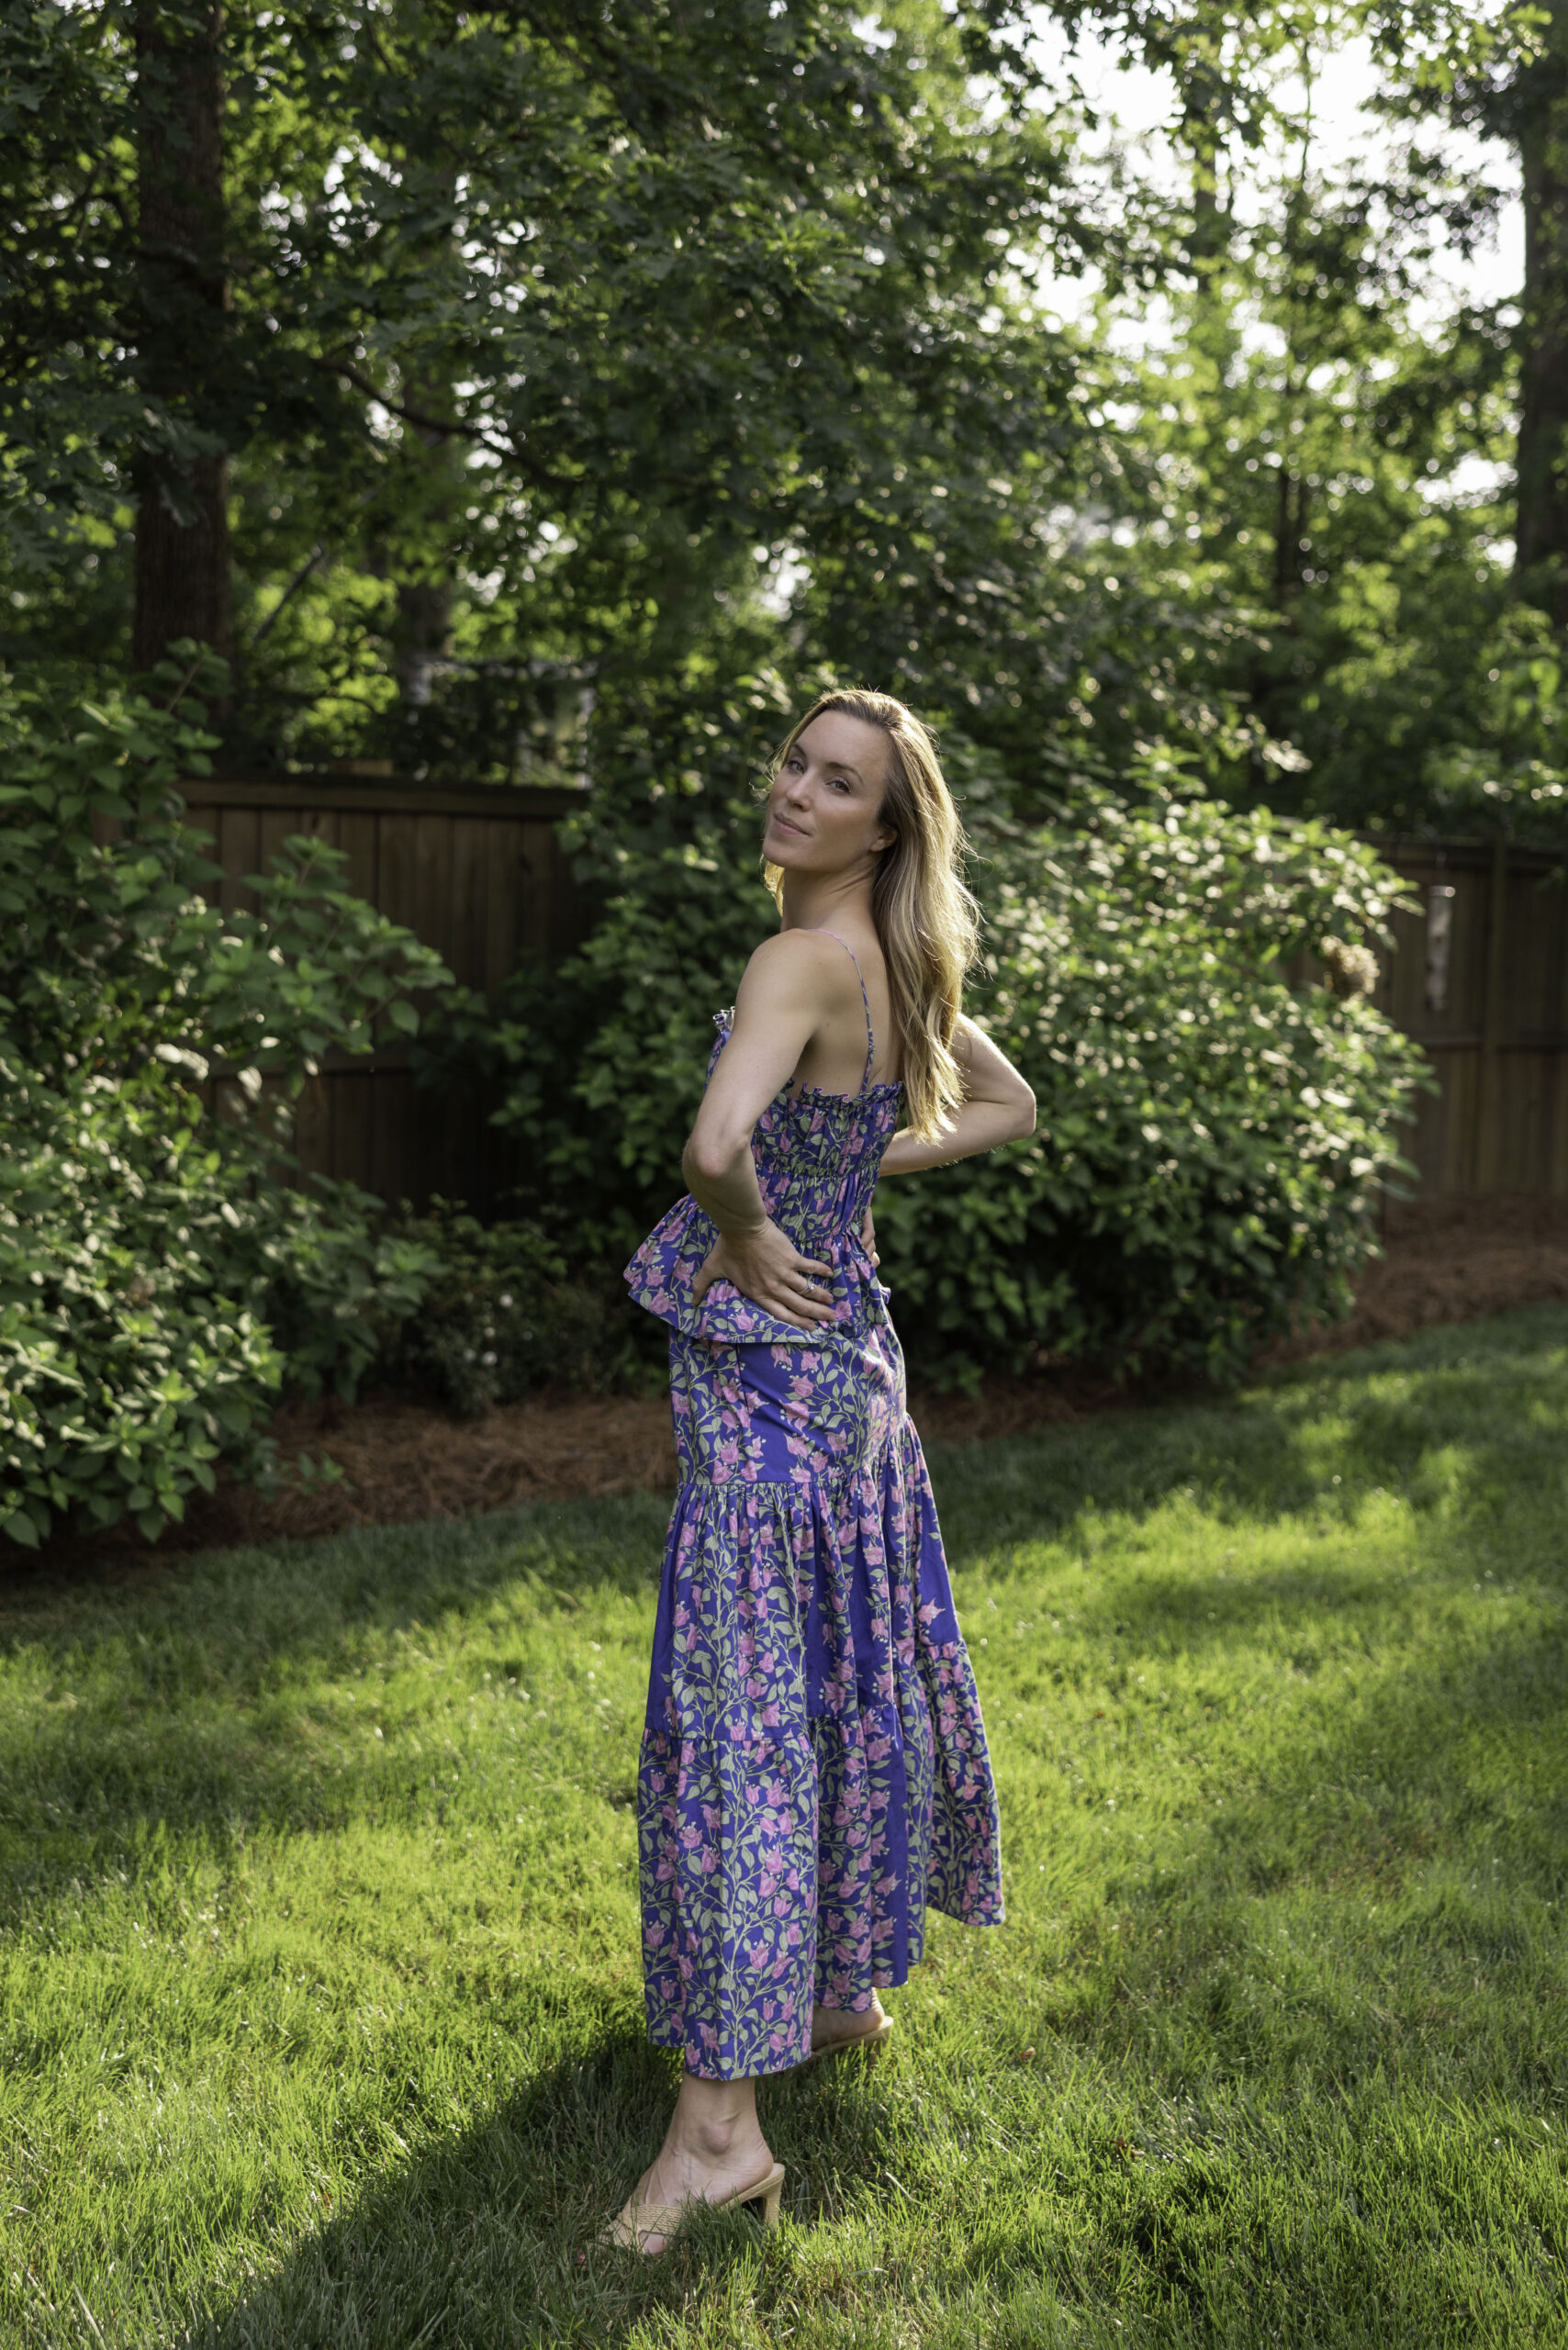 Long Summer Skirts that Are Easy to Style